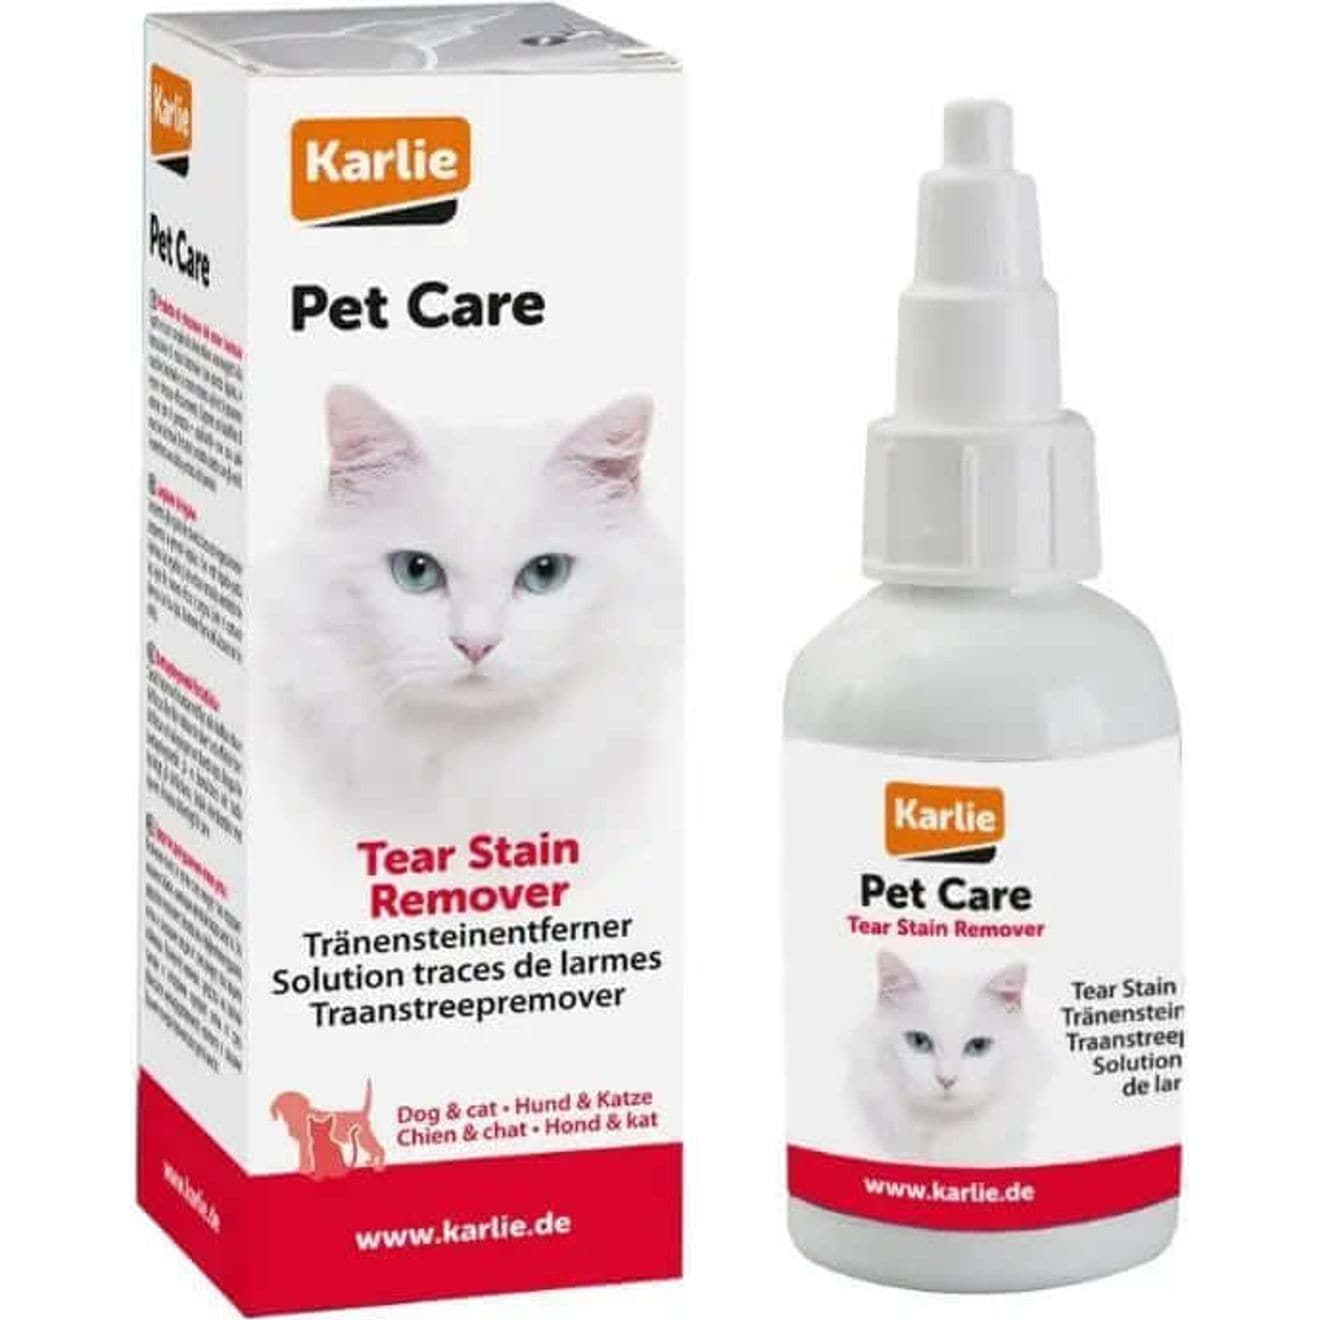 Tear stain remover - thepets.dk